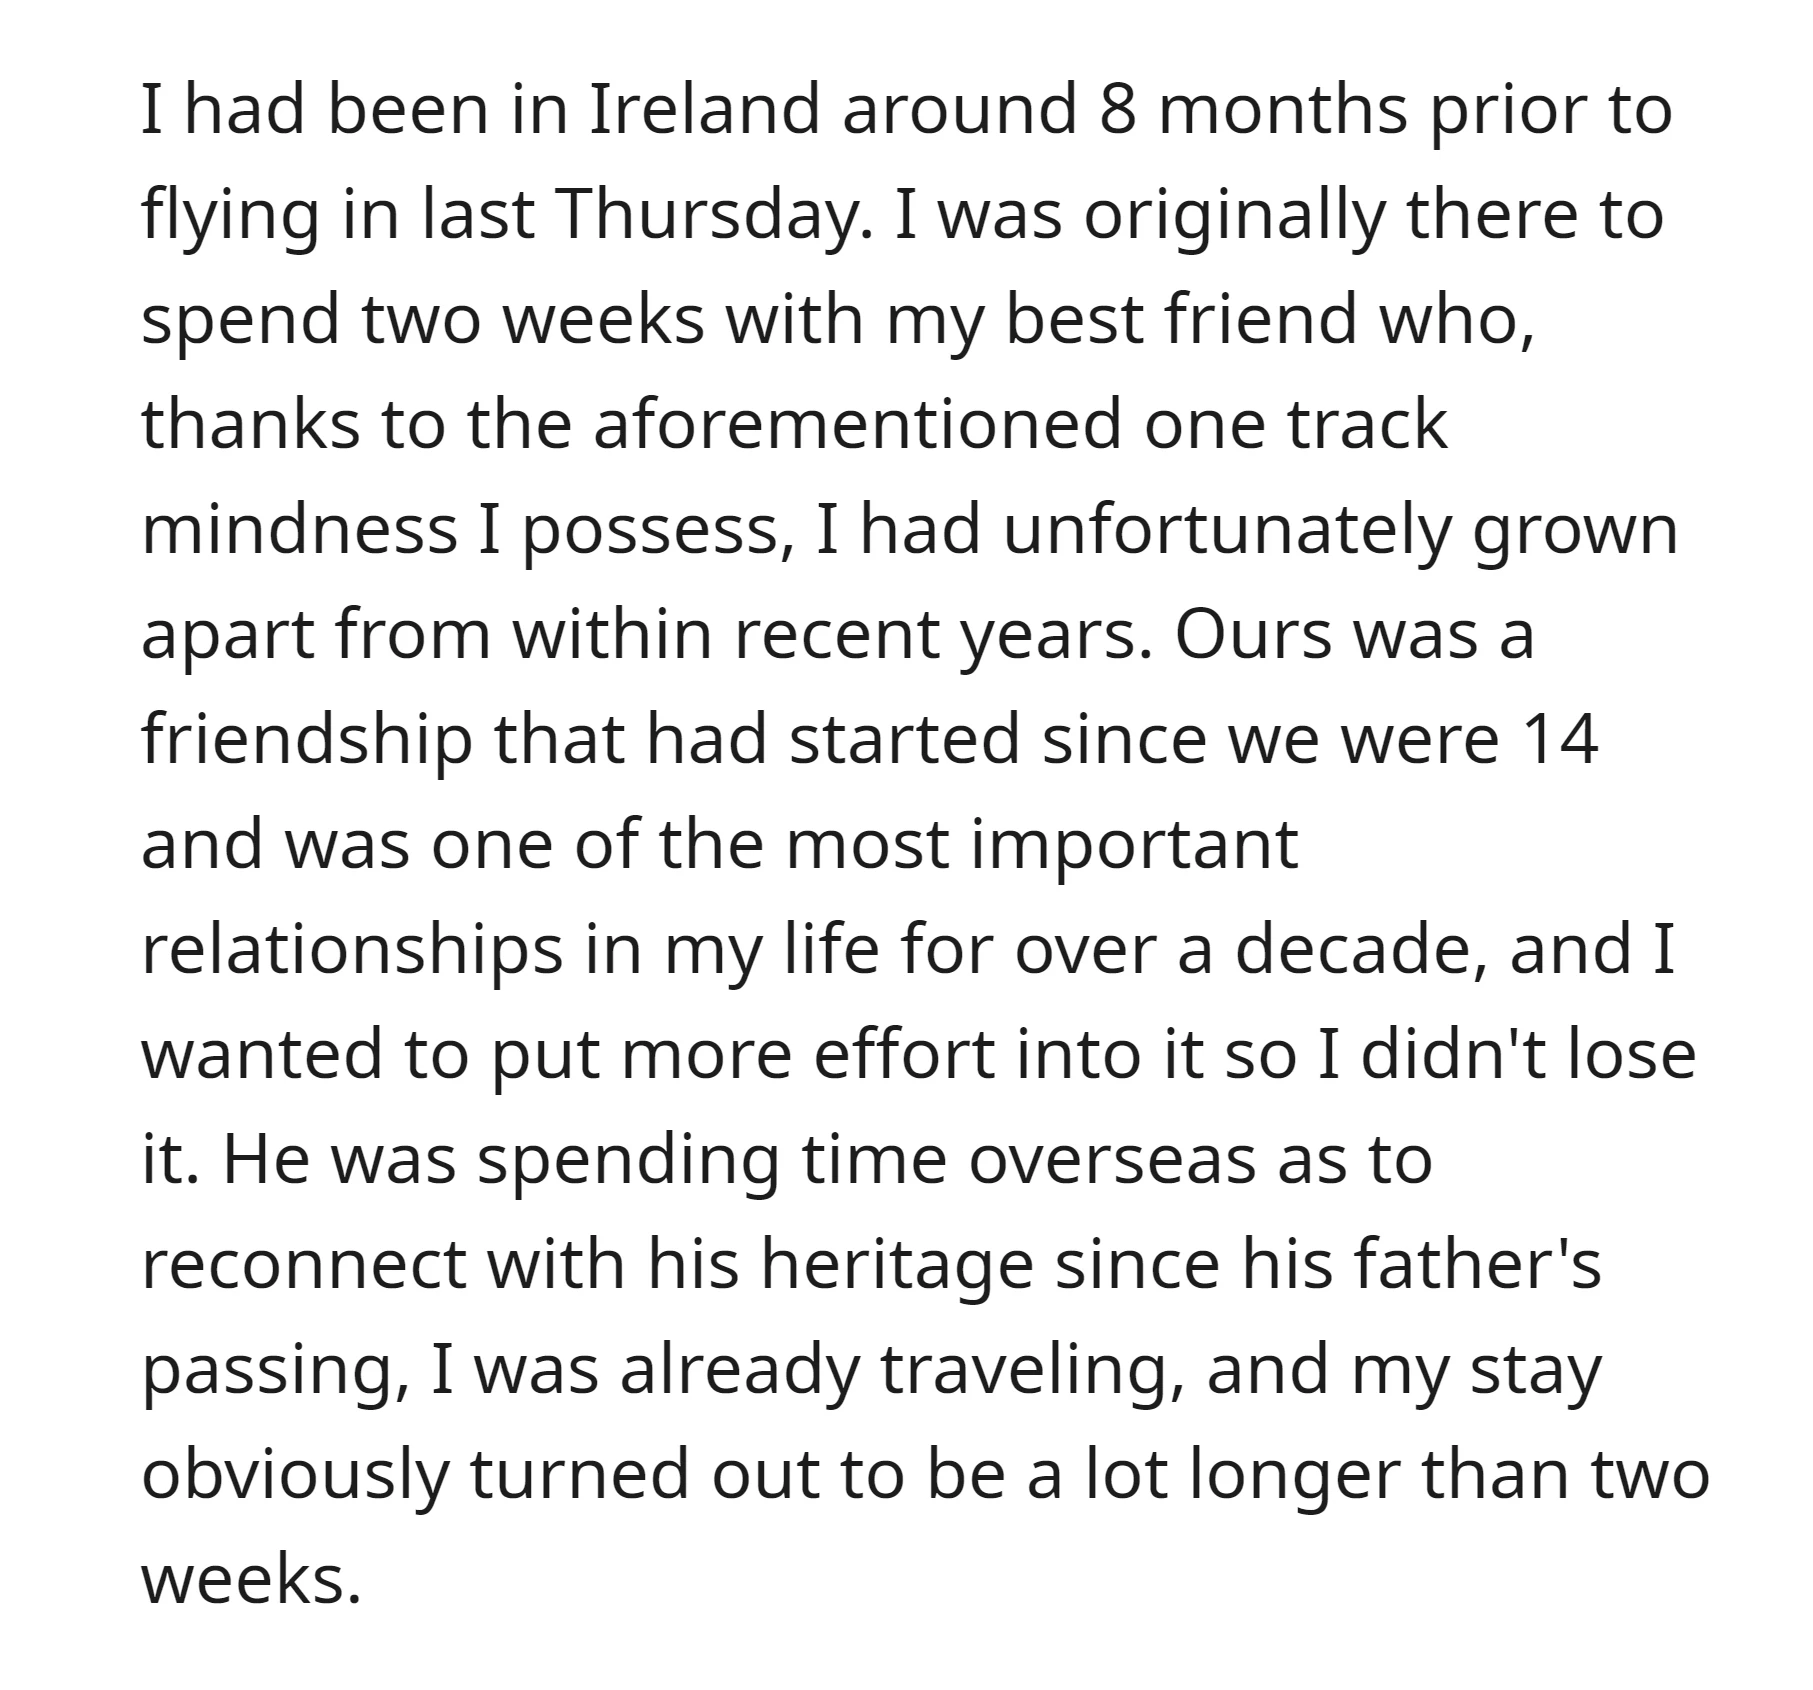 OP had been in Ireland for about eight months, initially planning a two-week visit with a best friend